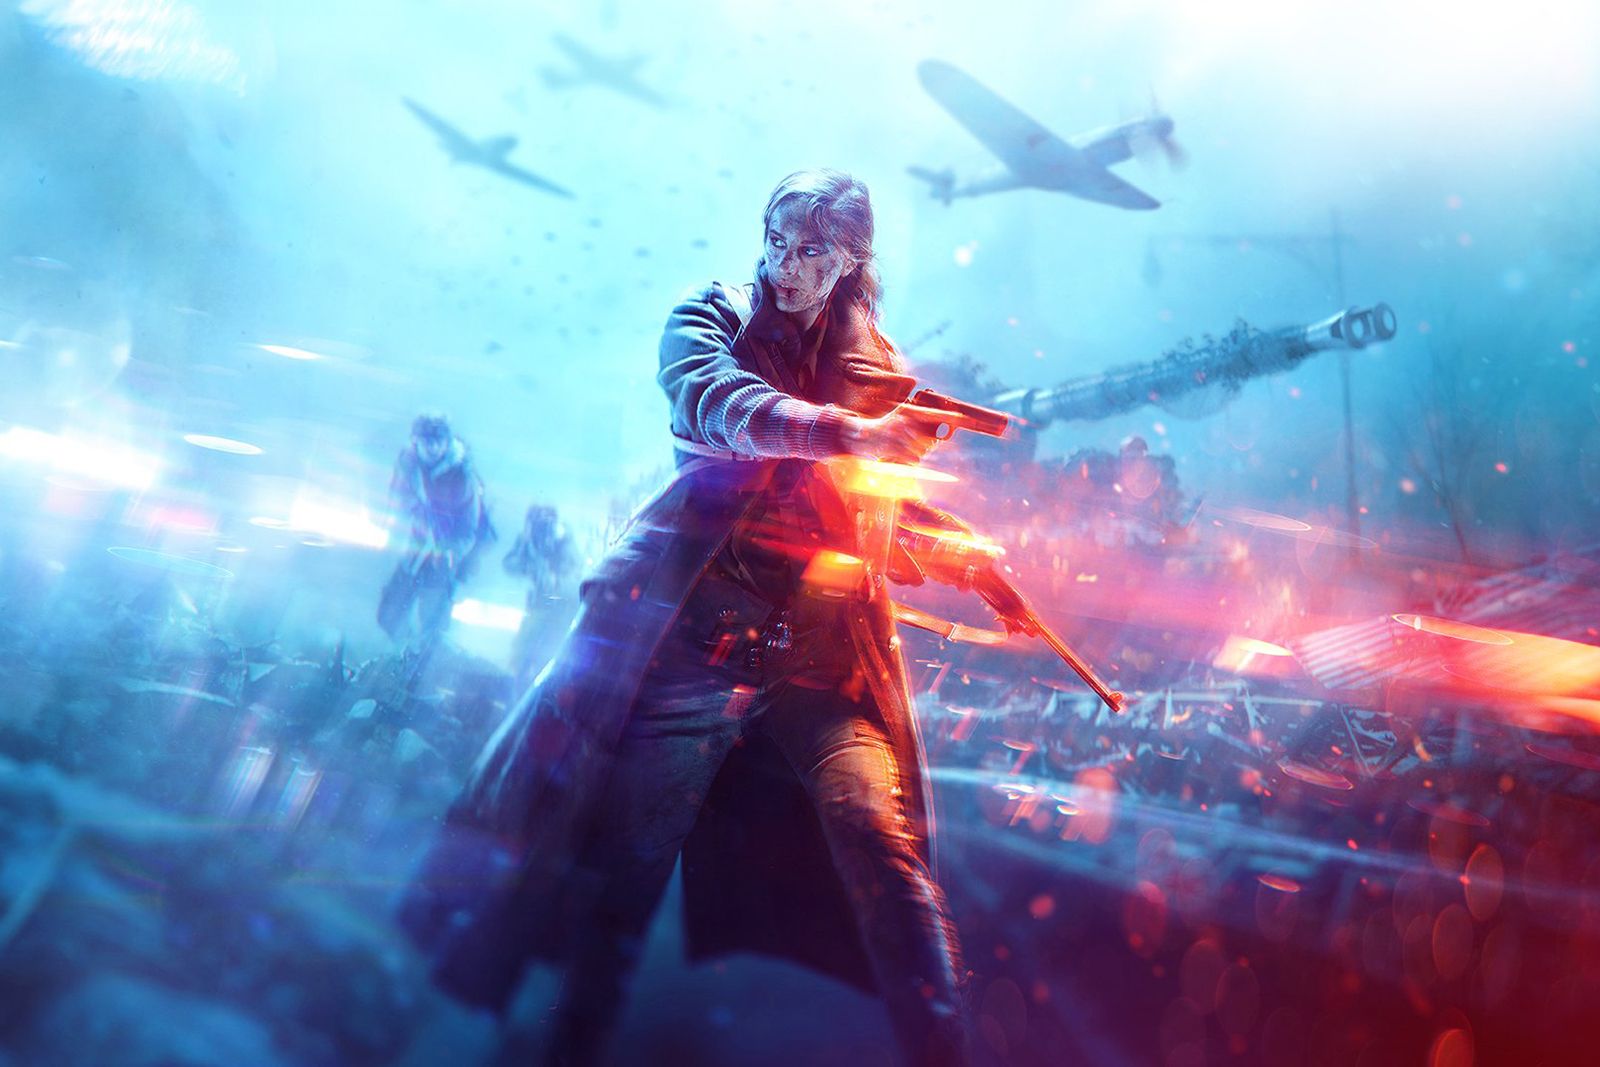 Battlefield Mobile: Game modes and everything we know so far